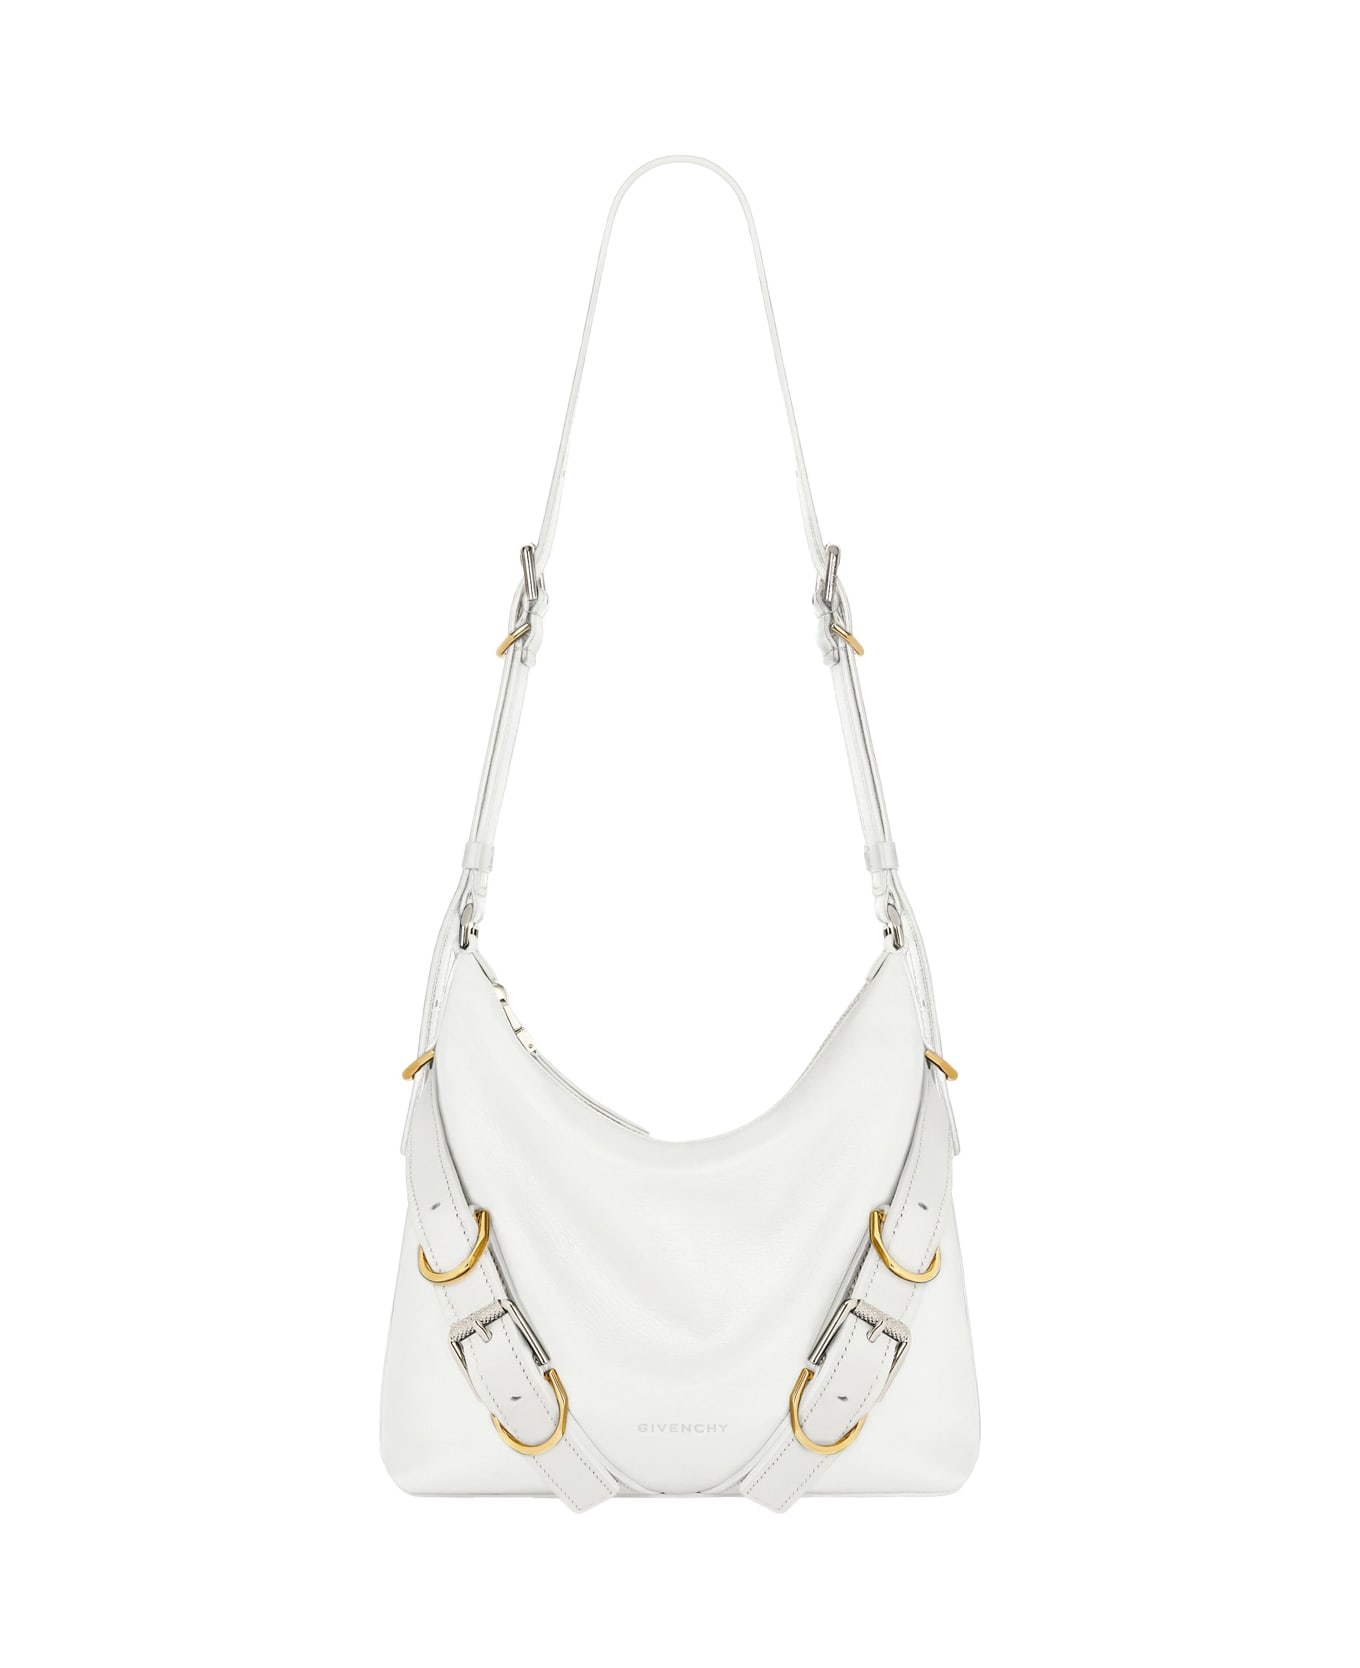 Givenchy Voyou Crossbody Bag In Ivory Leather - White トートバッグ